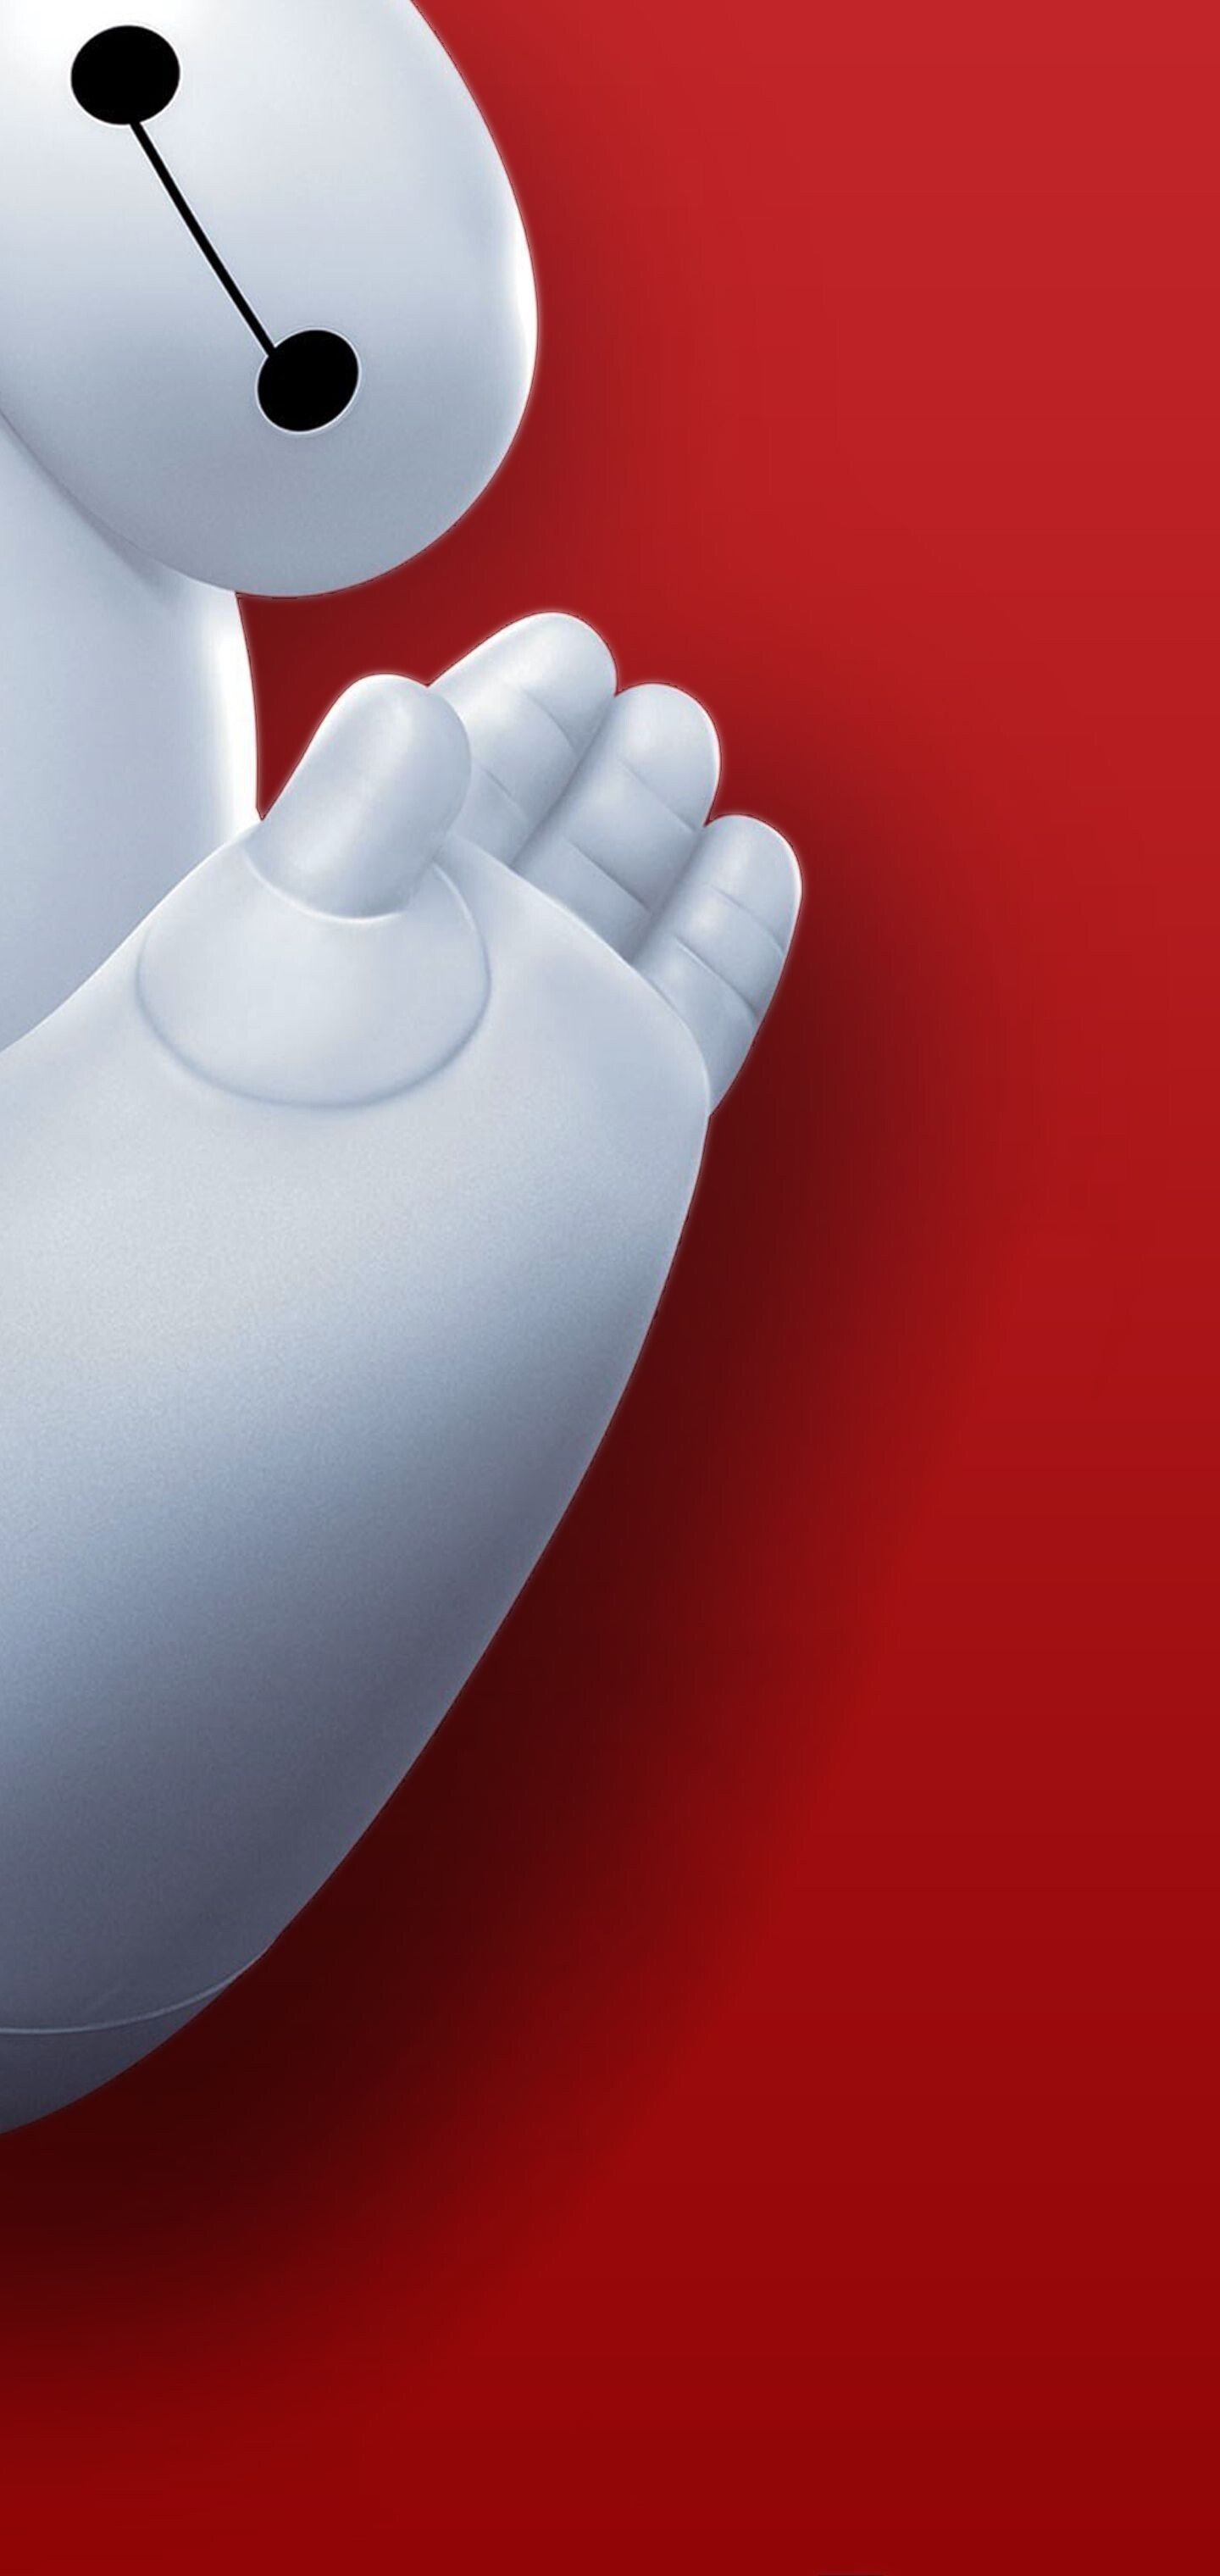 Baymax! (TV Series): An inflatable robot built to serve as a personal healthcare provider companion. 1440x3040 HD Wallpaper.